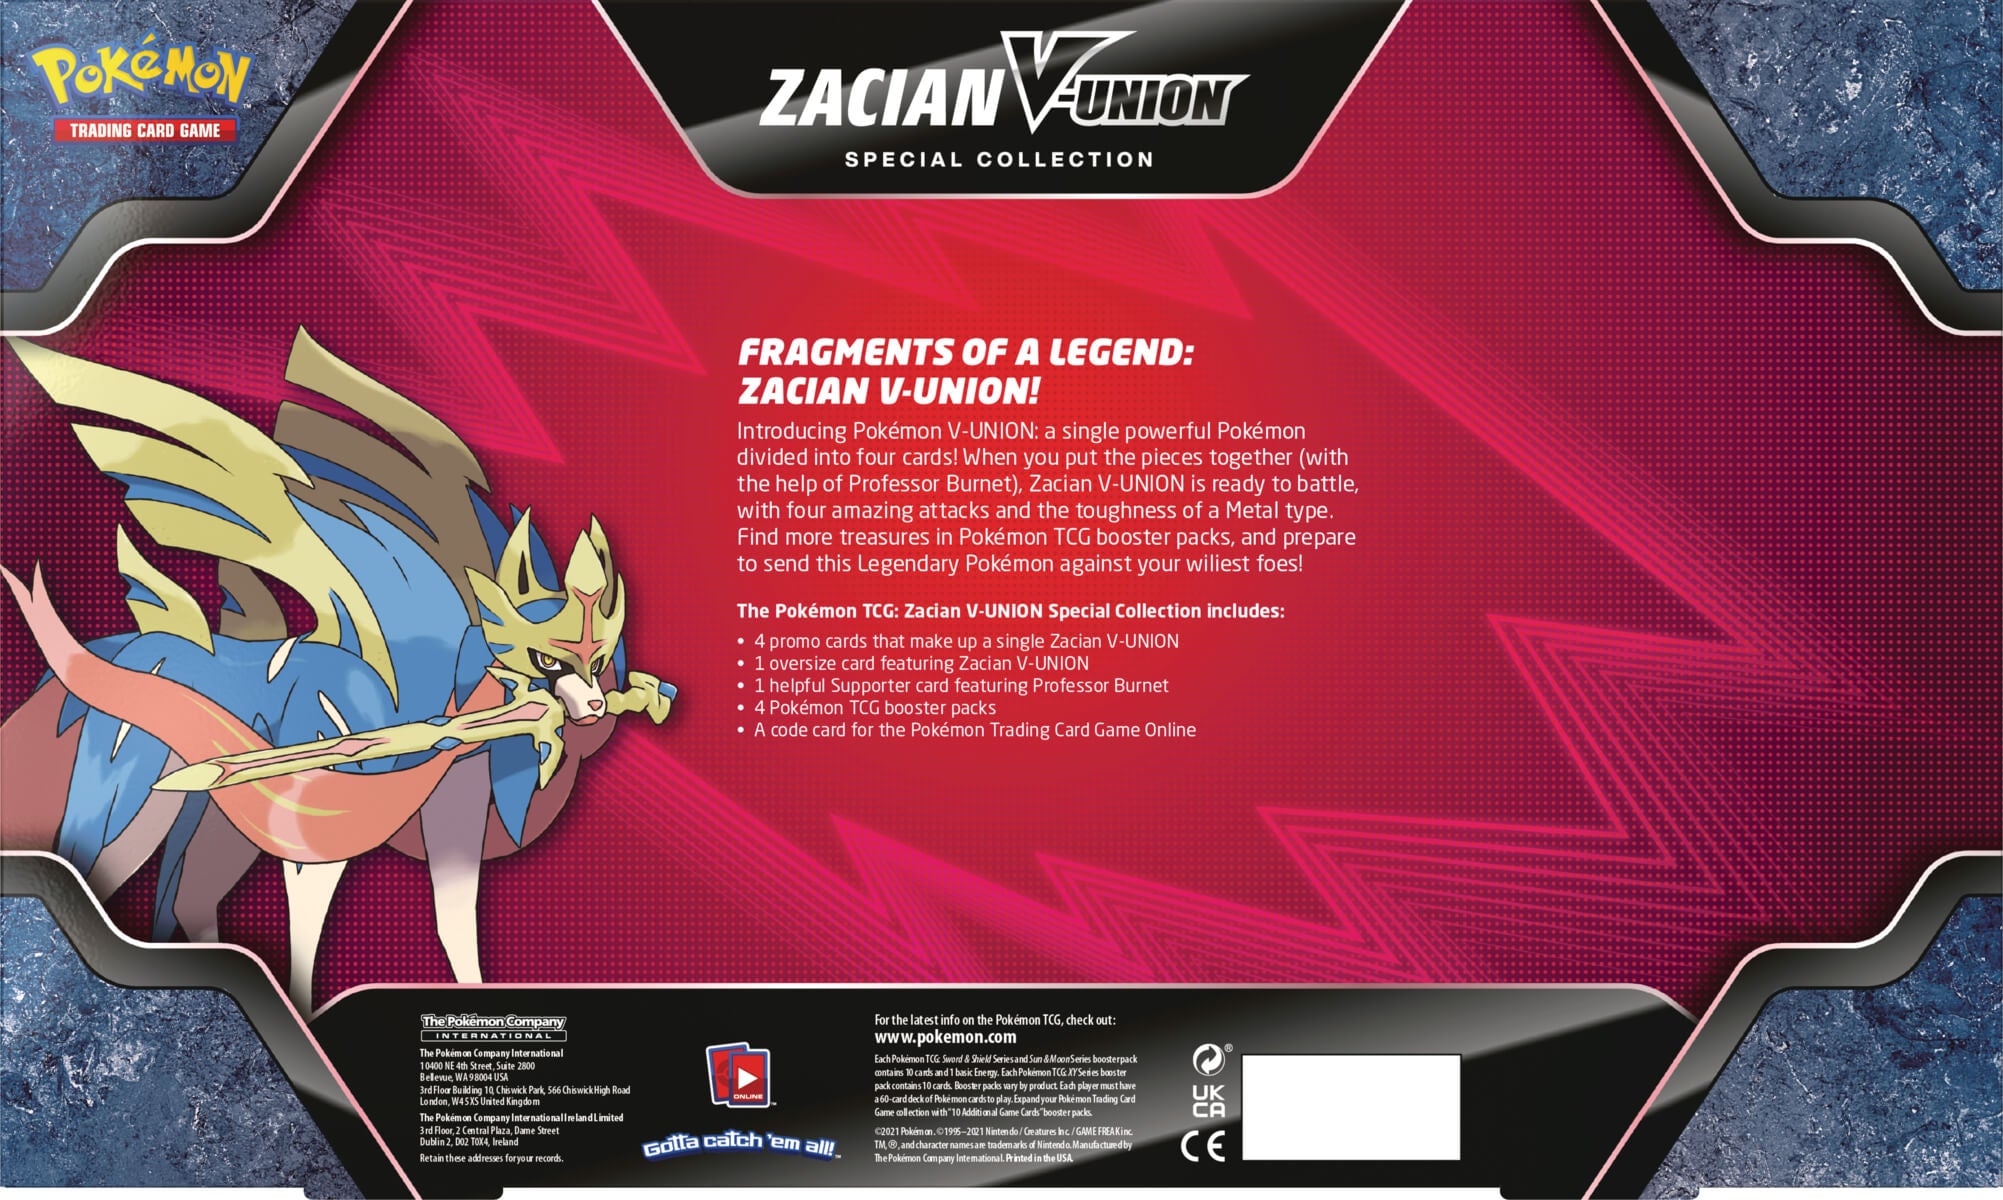 Pokemon Zacian V Union Special Collections